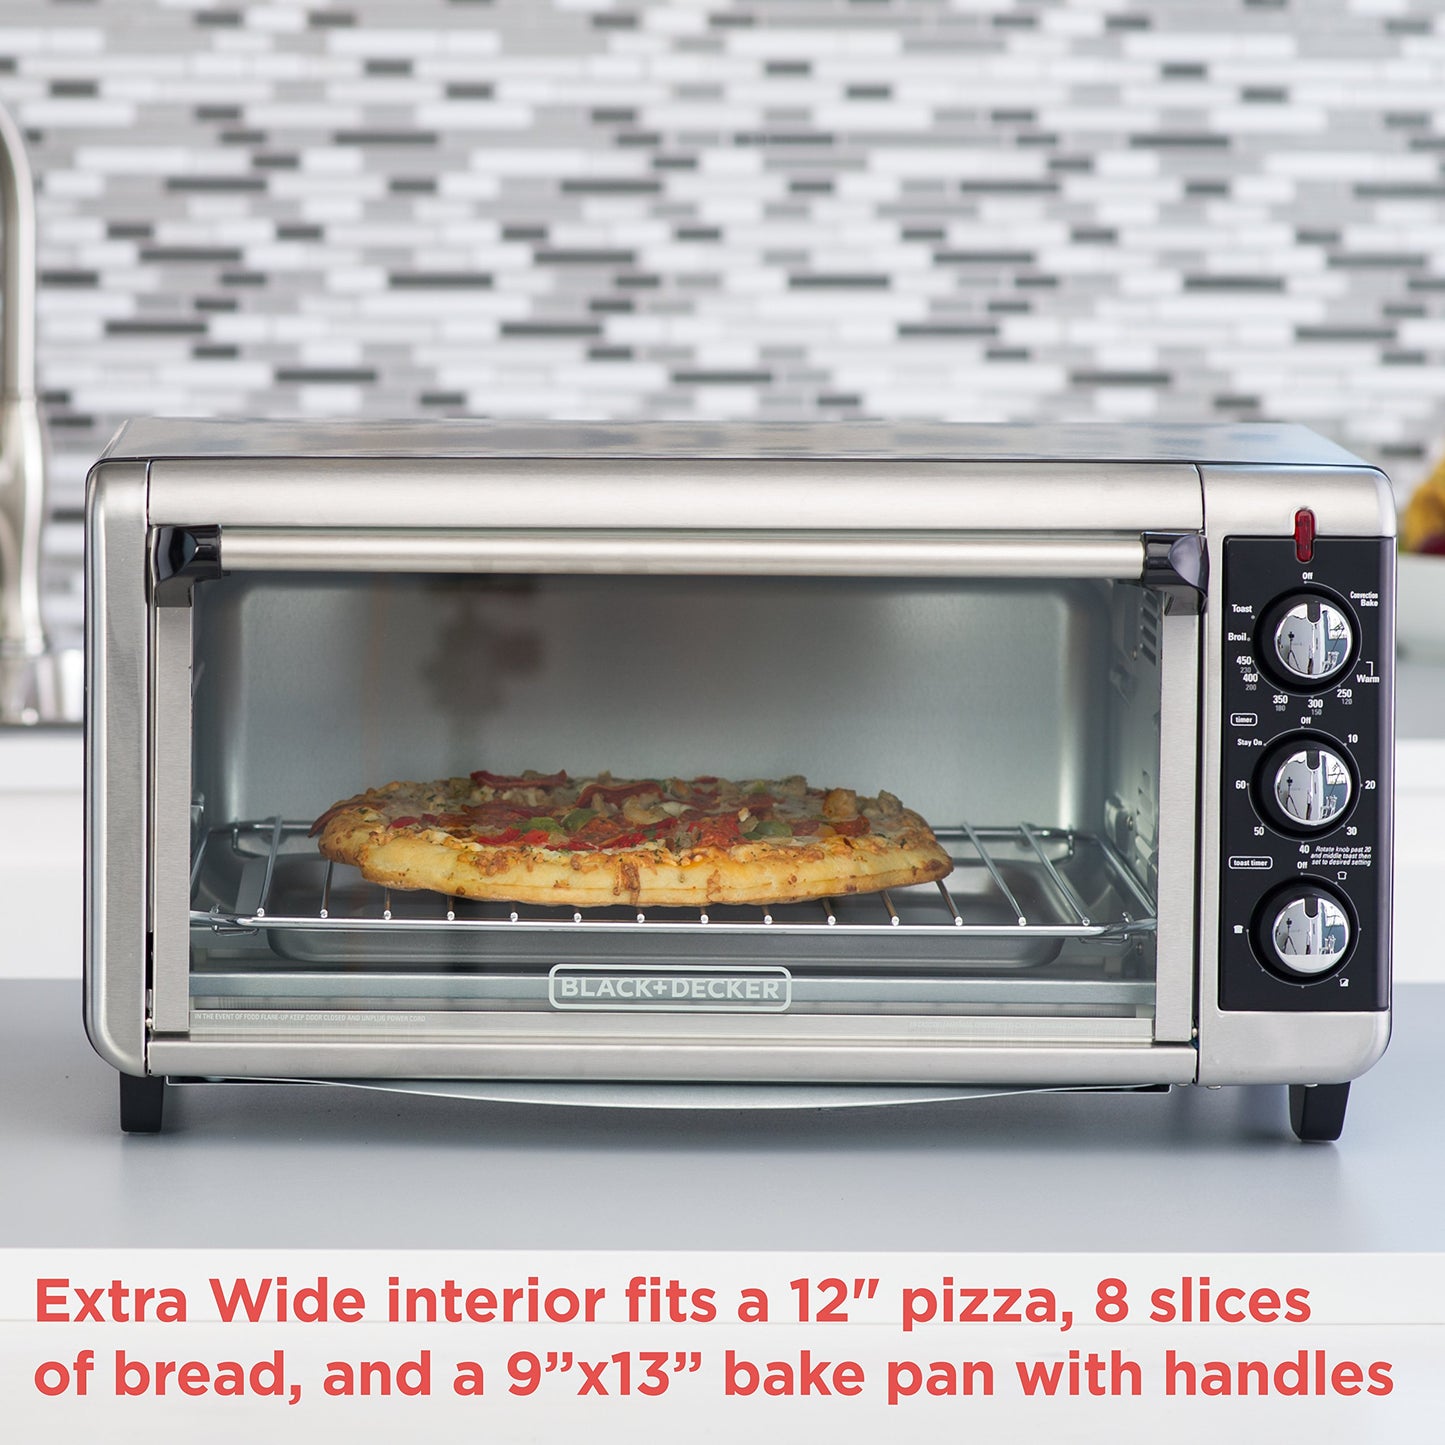 BLACK+DECKER 8-Slice Extra Wide Convection Toaster Oven, TO3250XSB, Fits 9"x13" Oven Pans and 12" Pizza, Stainless Steel/Black